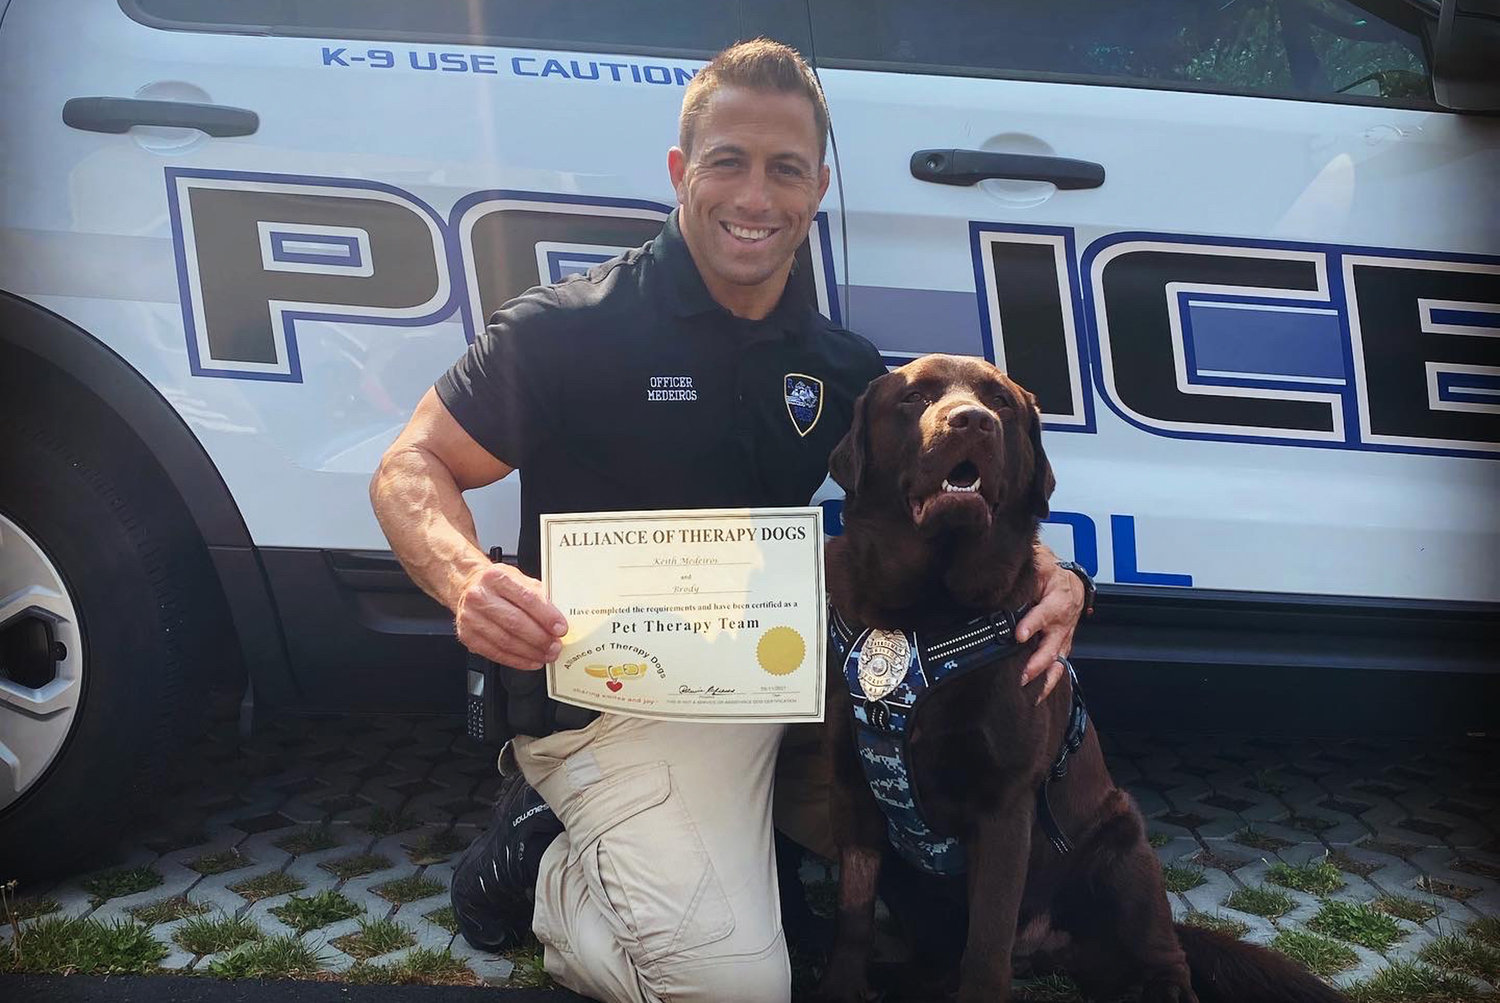 Officer Keith Medeiros with K-9 Brody reporting for duty